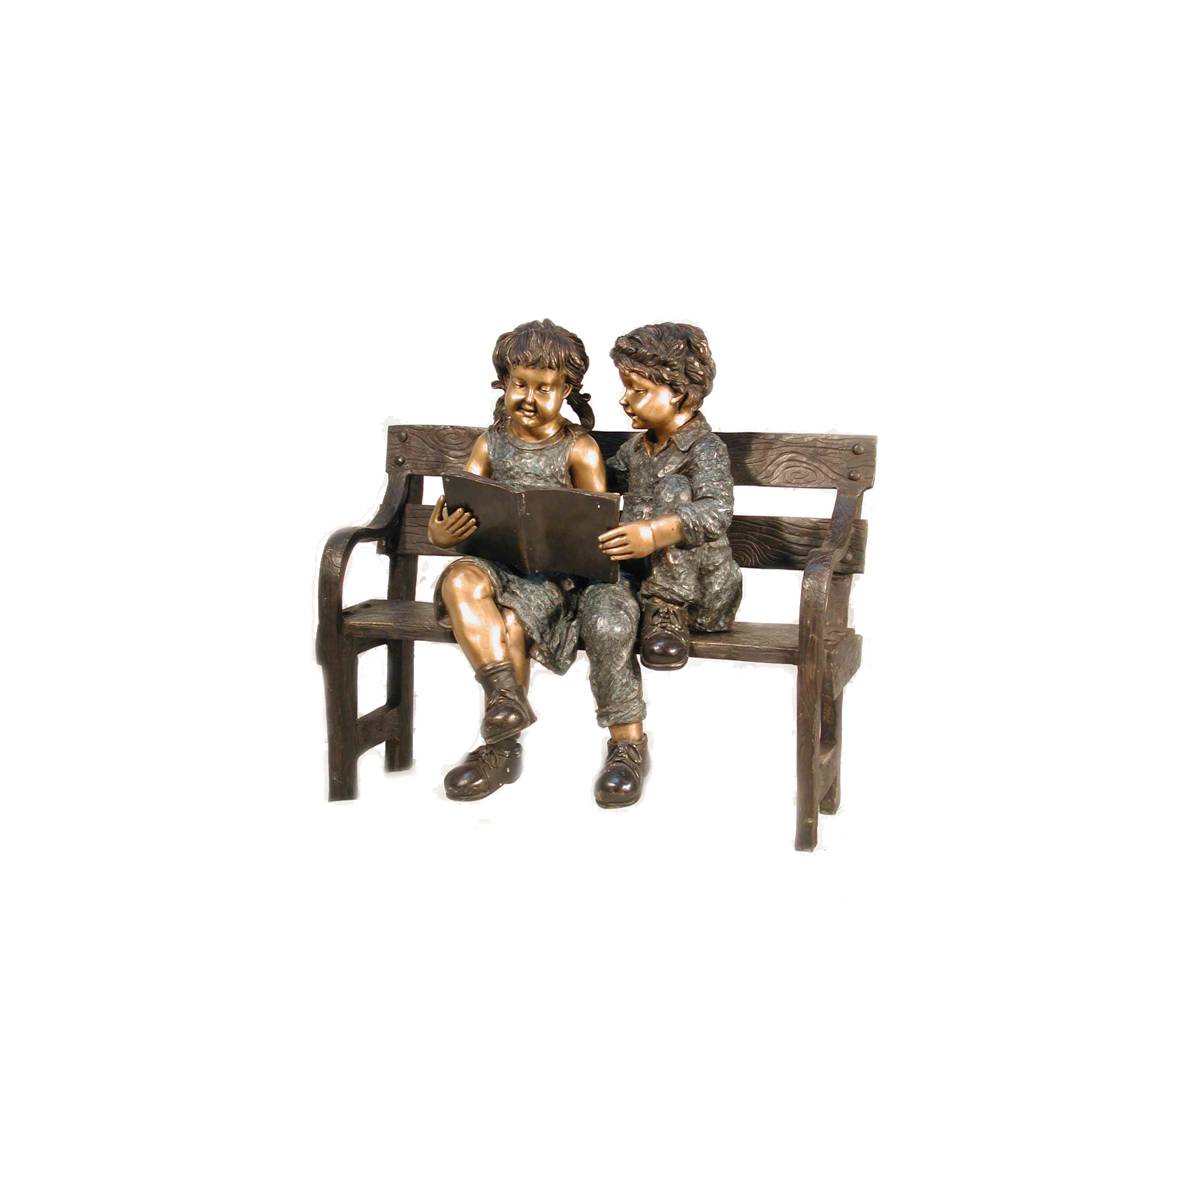 Bronze Boy and Girl Reading on Bench Sculpture